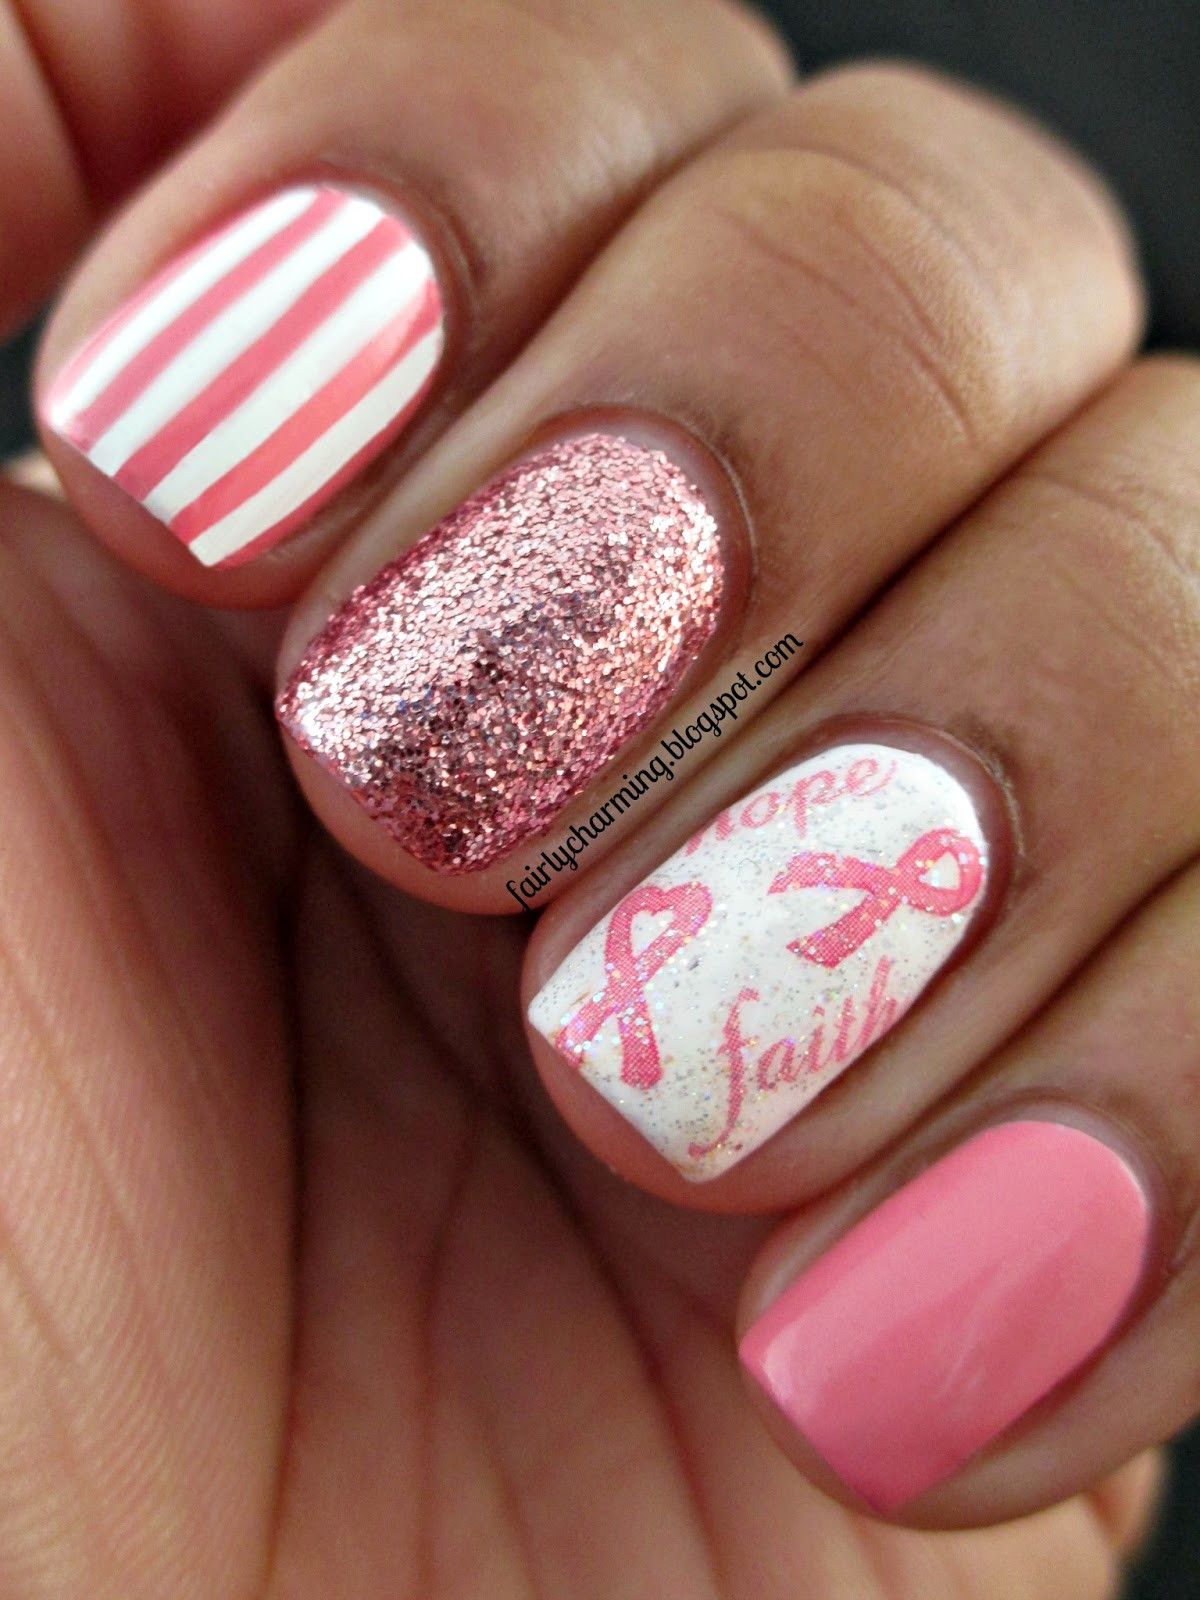 Breast Cancer Awareness Nail Designs
 Fairly Charming Joby Nail Art s Fight Against Breast Cancer